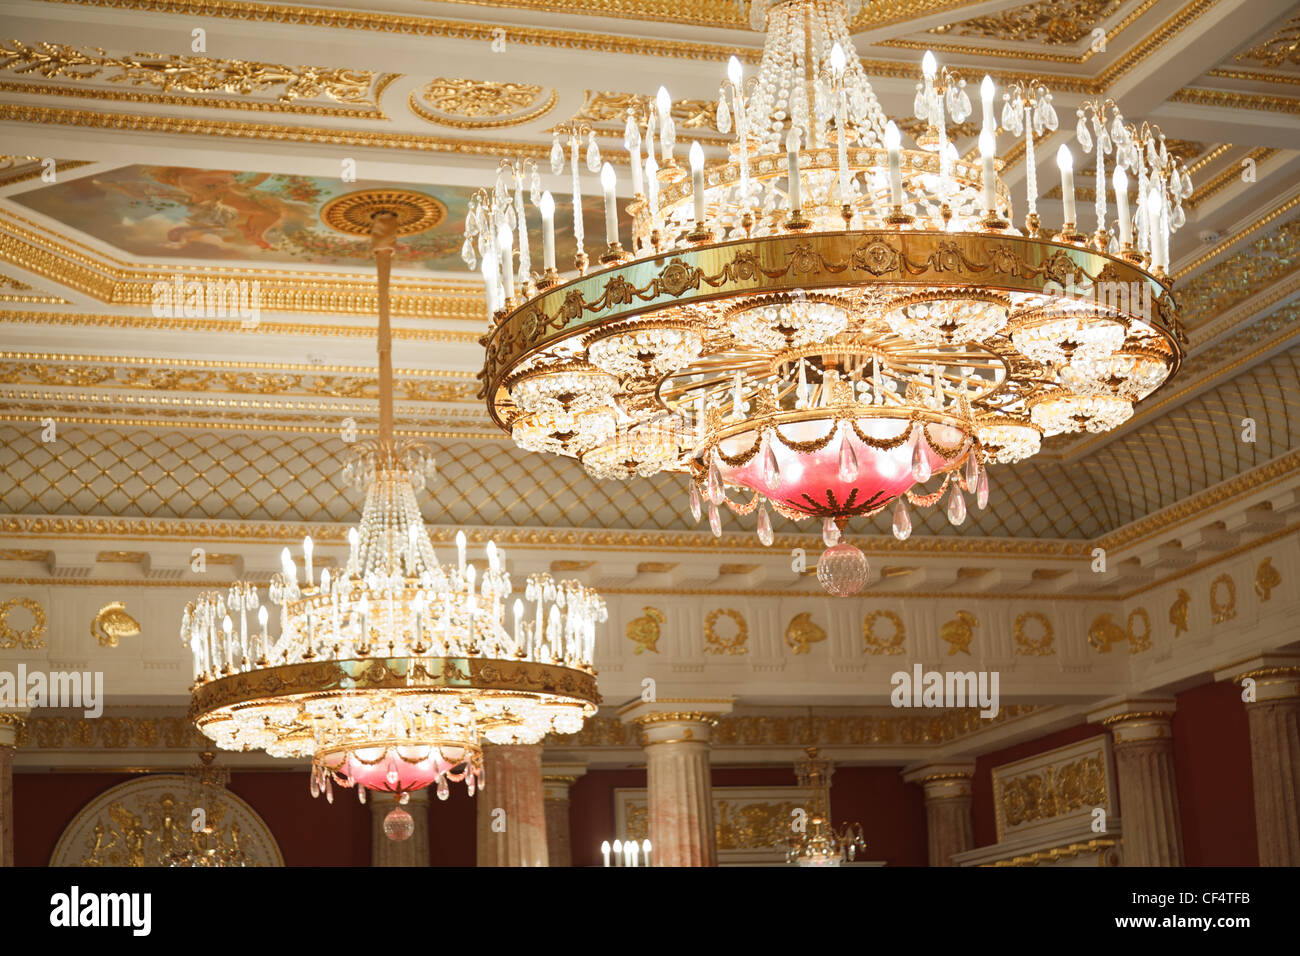 Chandeliers of State historical and architectural museum reserve Tsaritsyno, Russia. It was build in 1776. Stock Photo